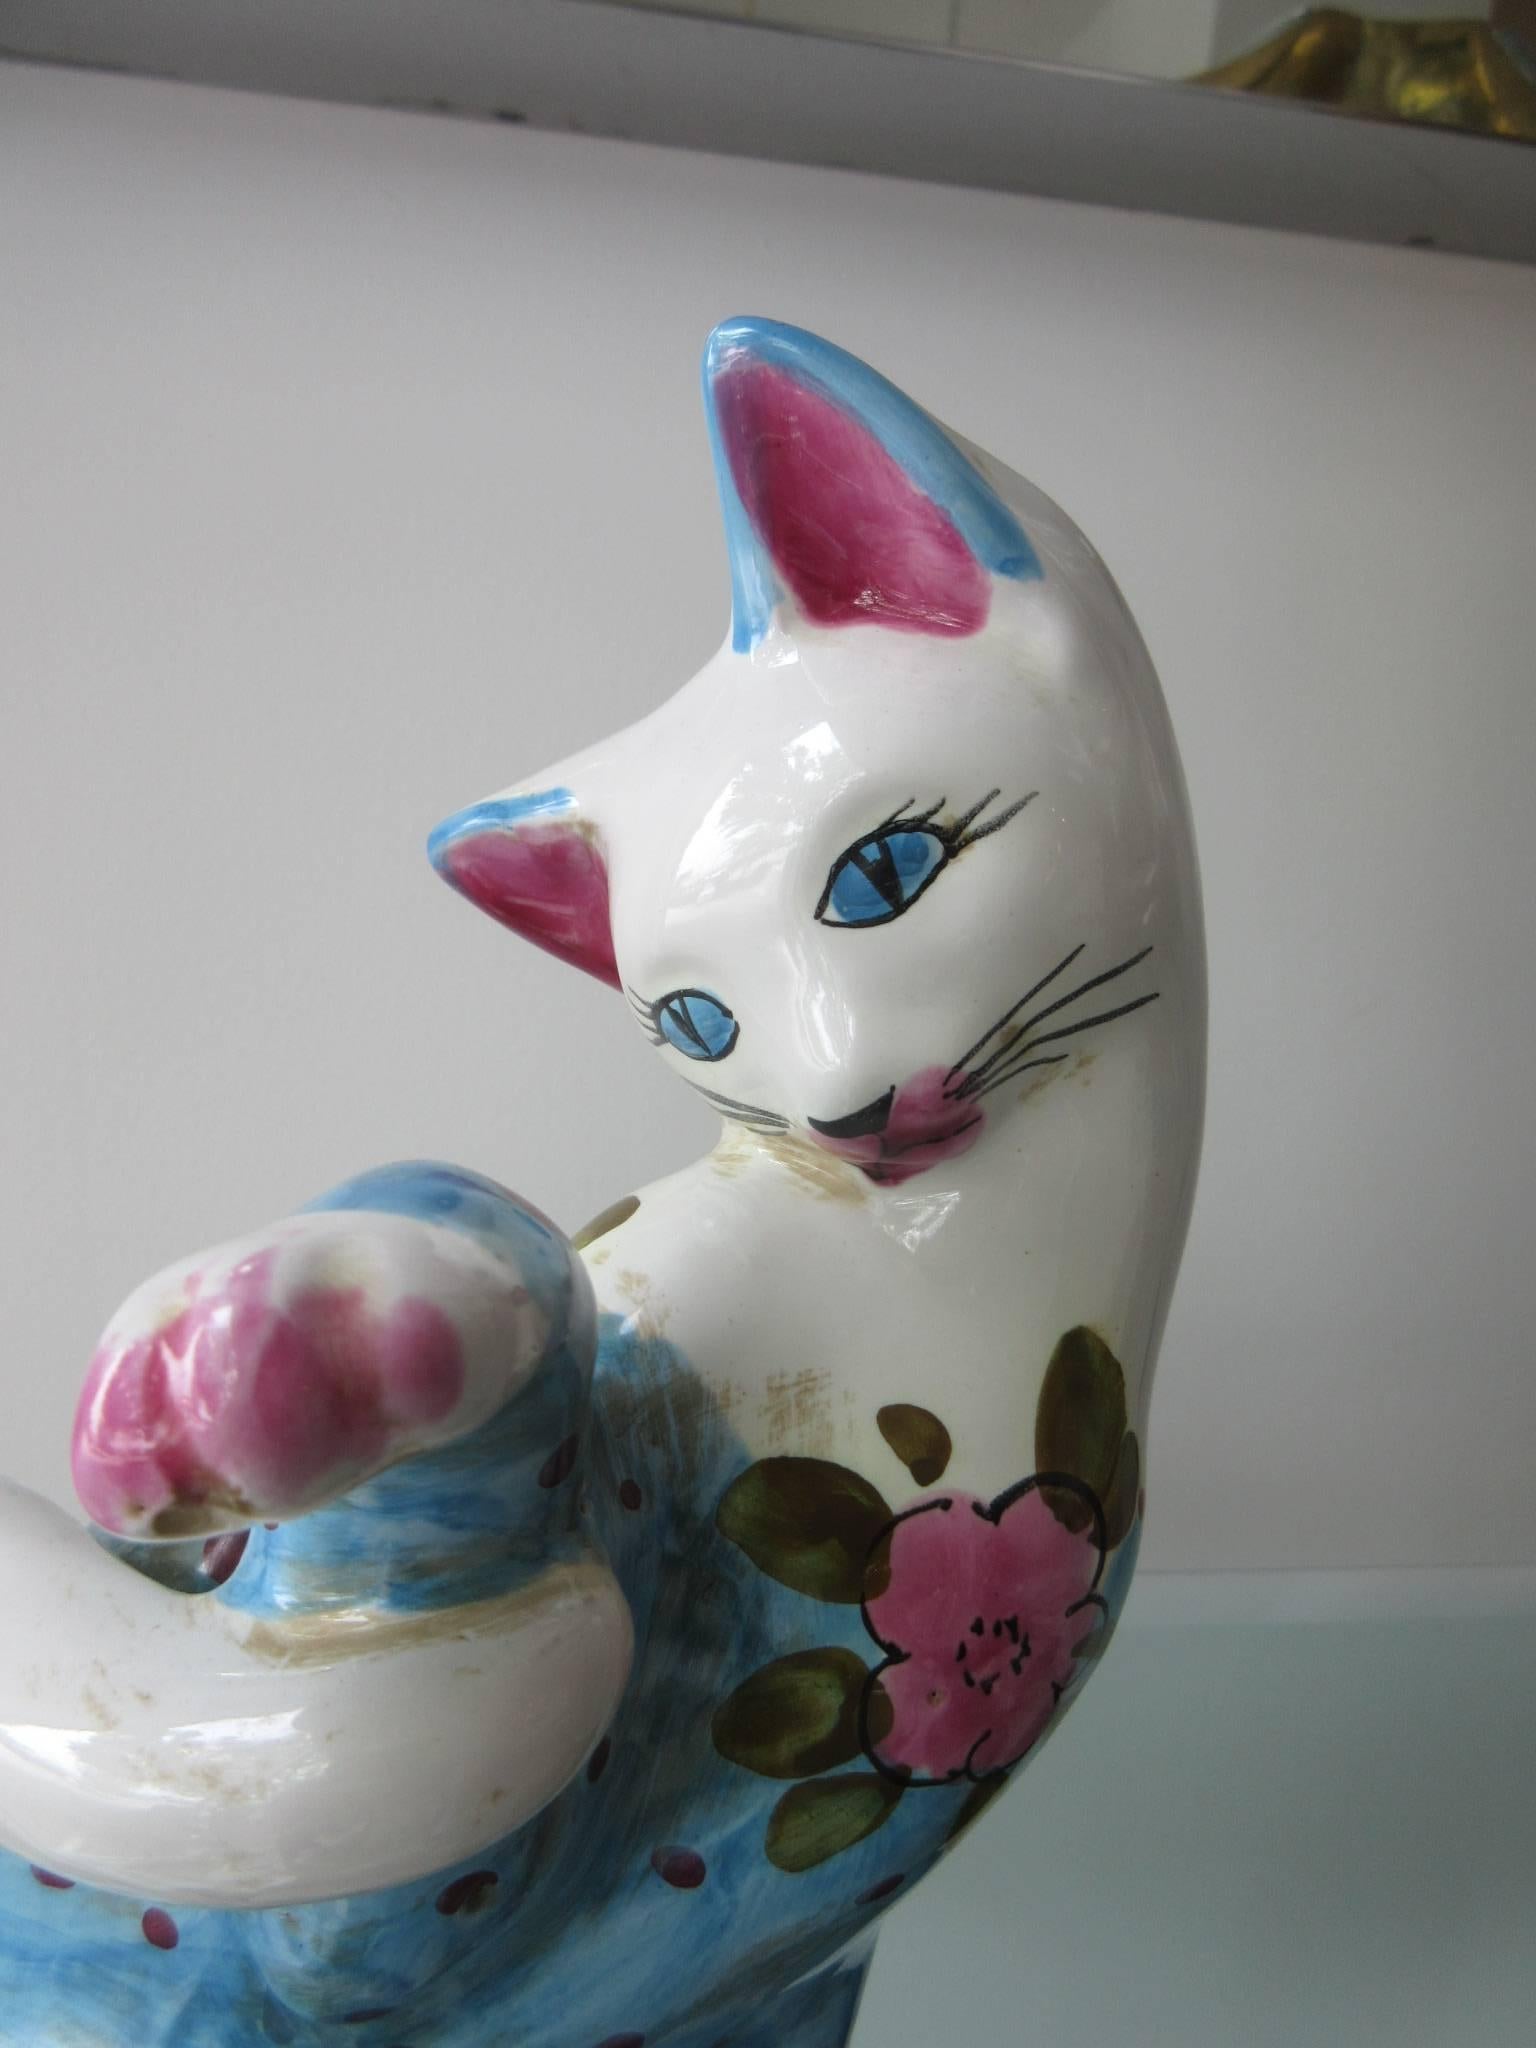 Vintage Italian glazed ceramic cat (Smaller) handmade in Italy in the style of Fornasetti. The palette is pink, blue and white. We have the larger compatible cat in another listing. Be sure to see them together. 

